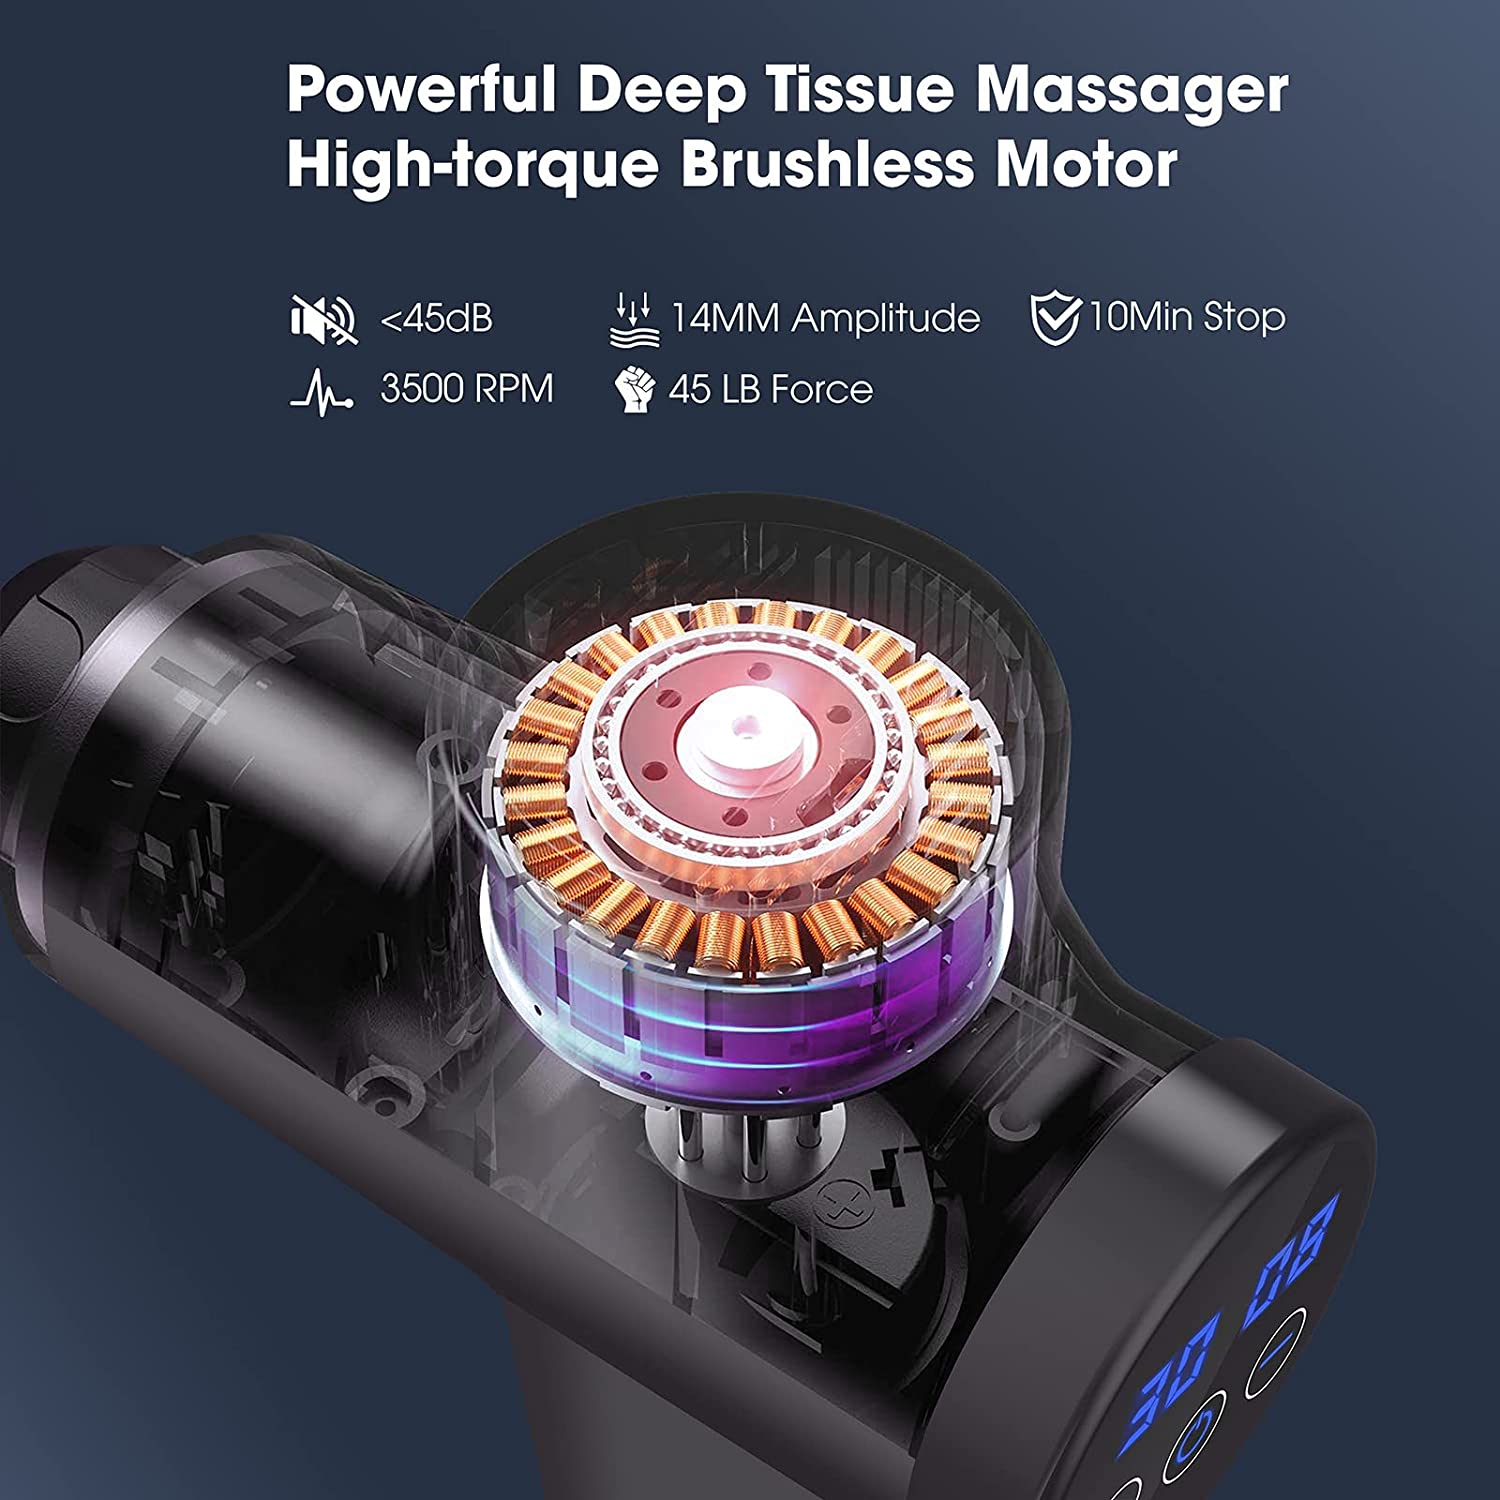 30 Speed Massage Gun for Athletes,Cotsoco Upgrade Percussion Muscle Massage Gun with 10 Massage Heads,Handheld Deep Tissue Massager for Pain Relief (Black)